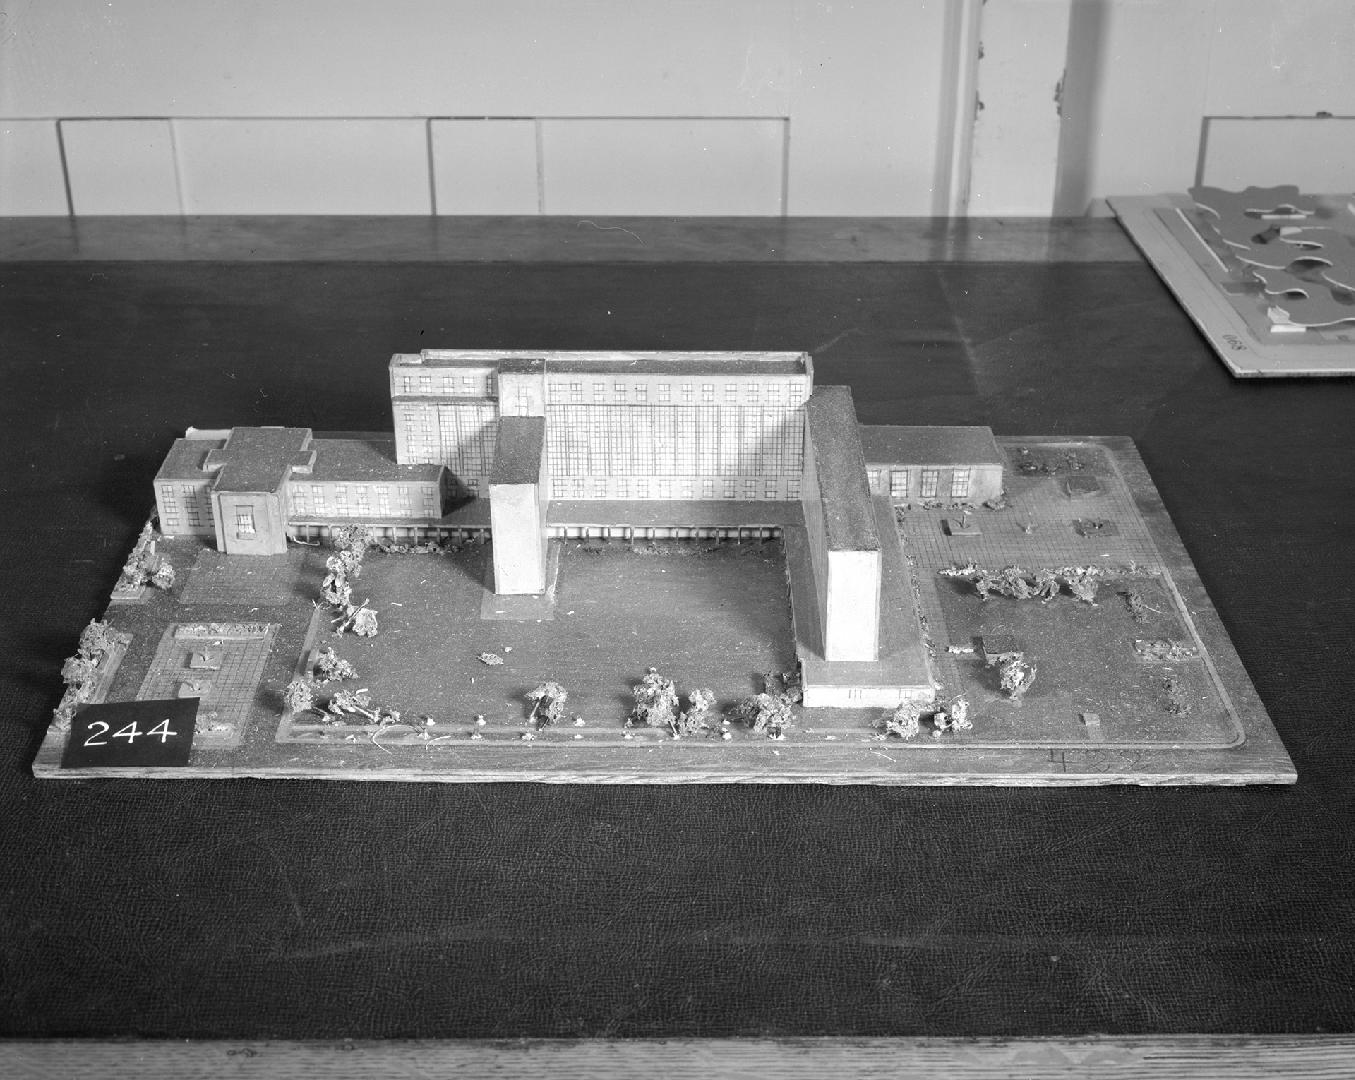 C. L. Morris entry, City Hall and Square Competition, Toronto, 1958, architectural model